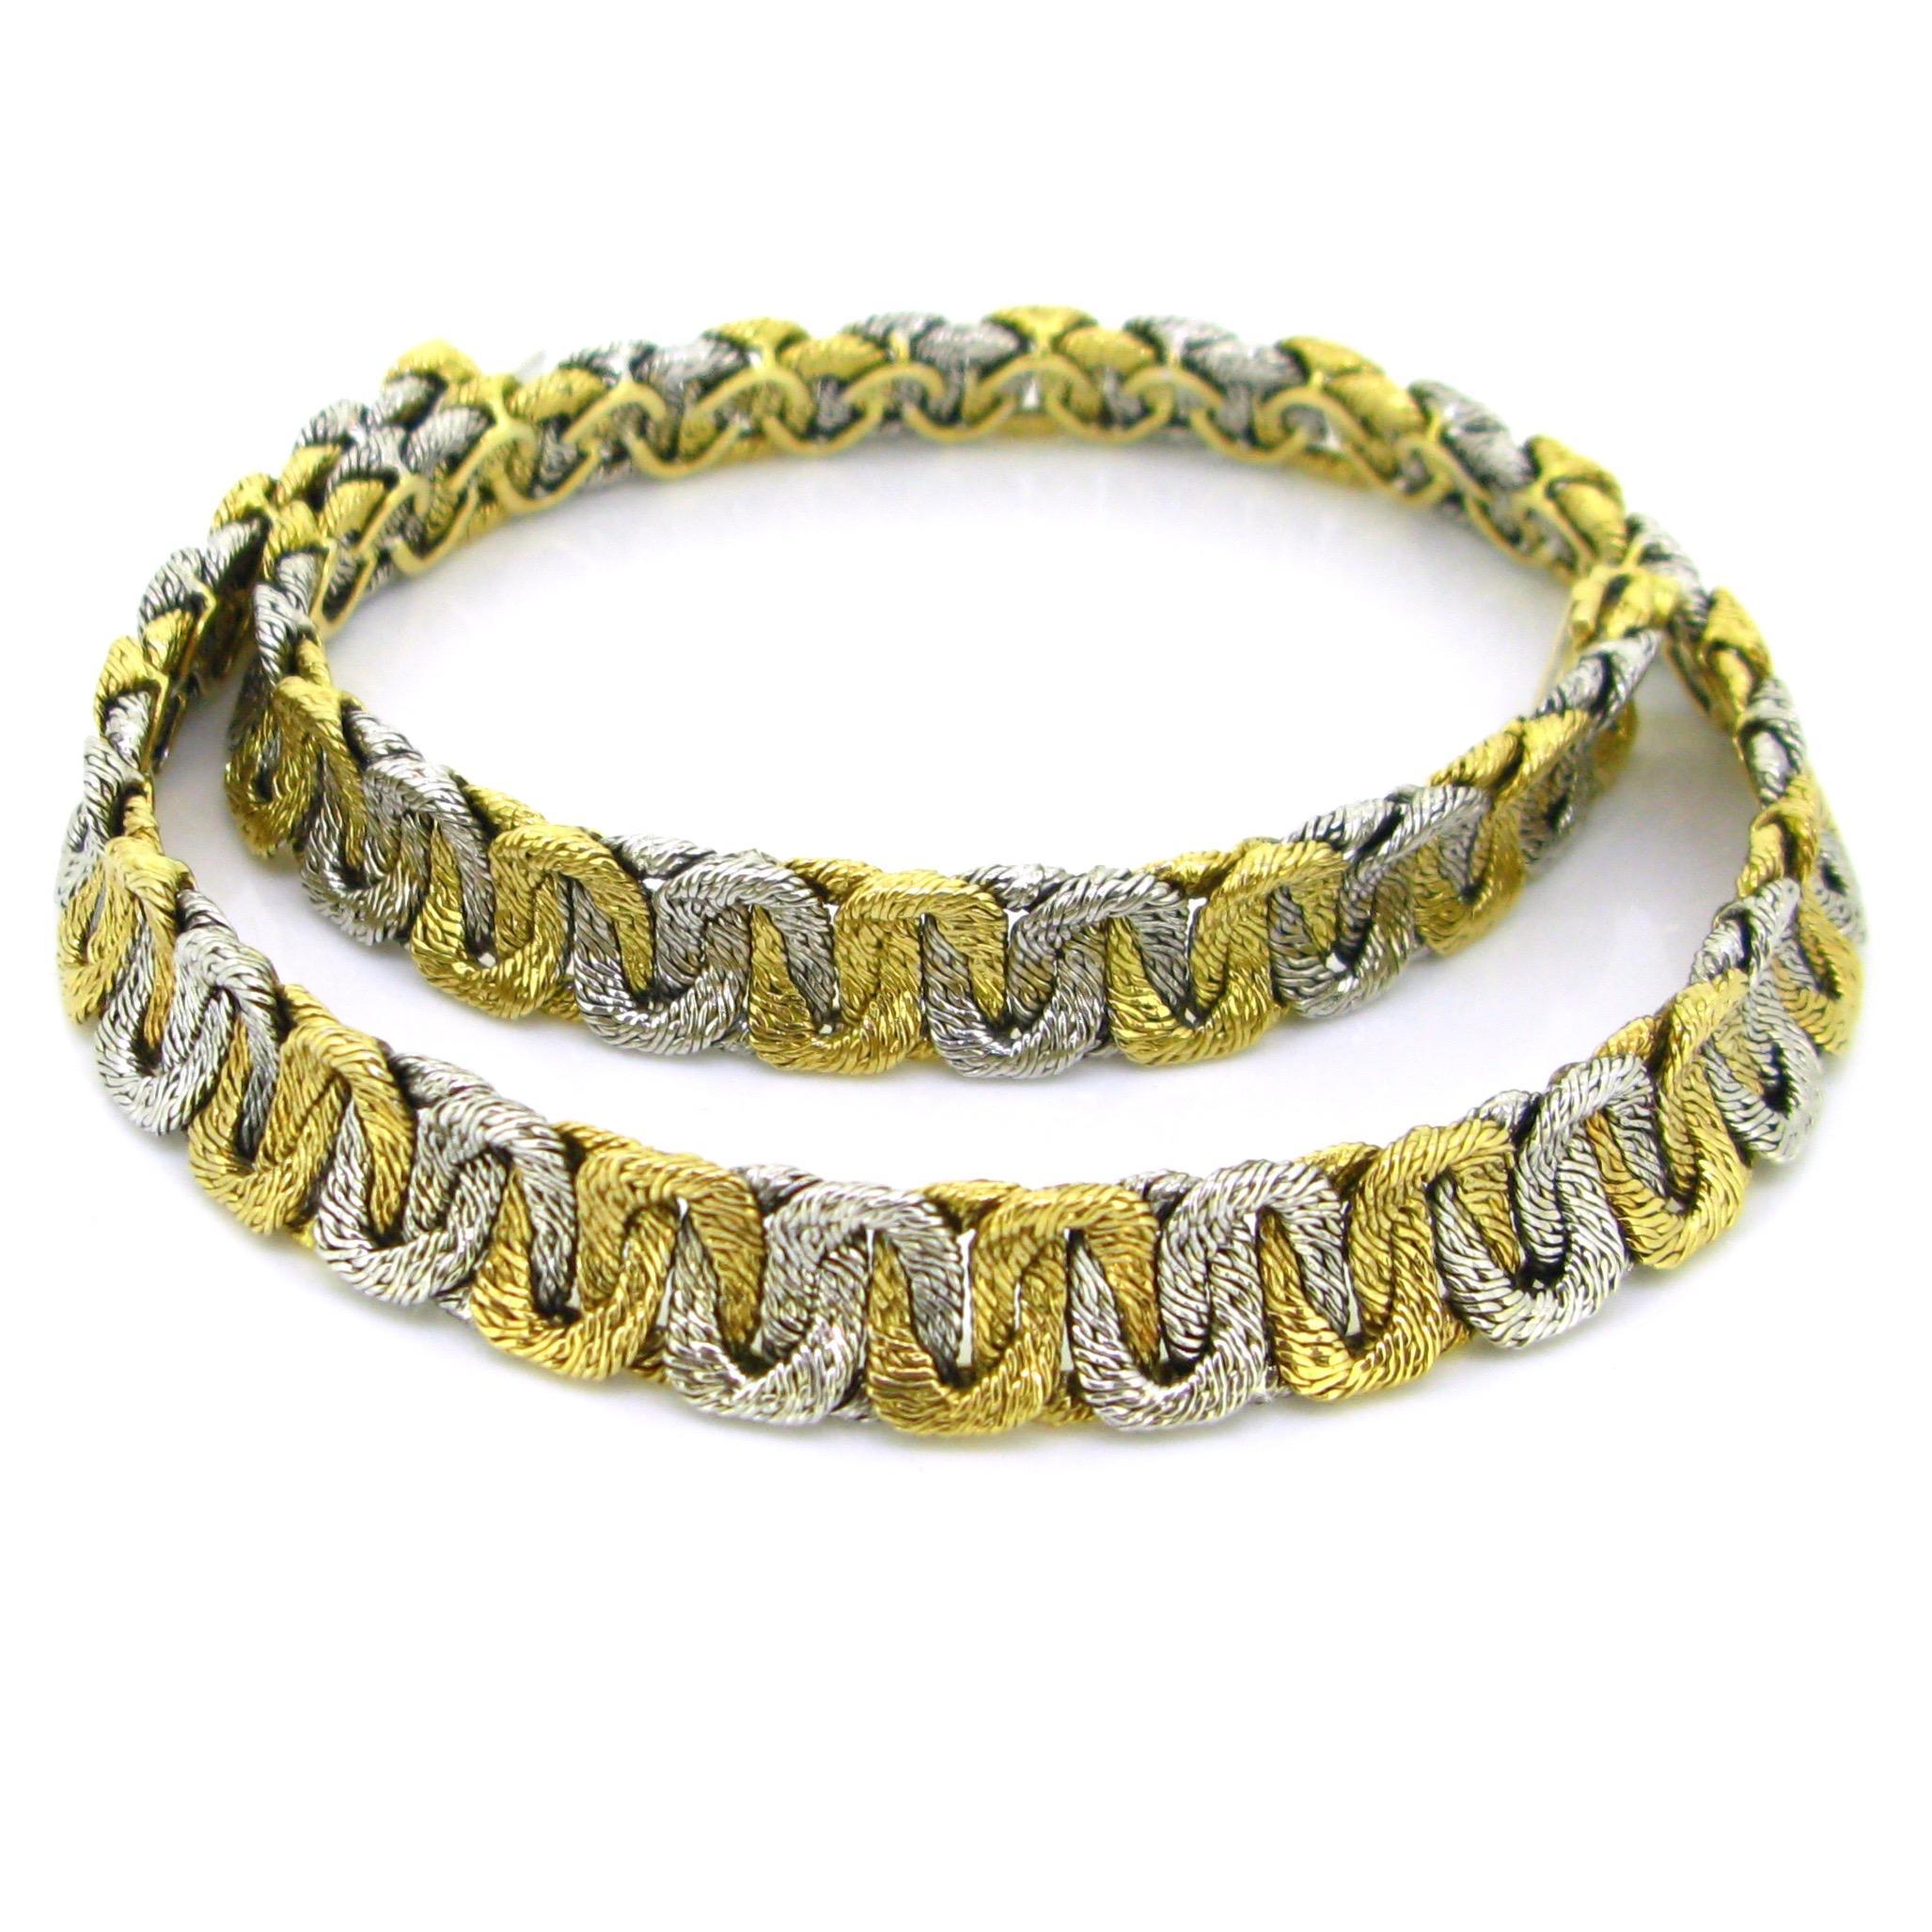 Women's or Men's Two Tones Gold Woven Collar Necklace by Georges Lenfant, 18kt gold, France, c1965